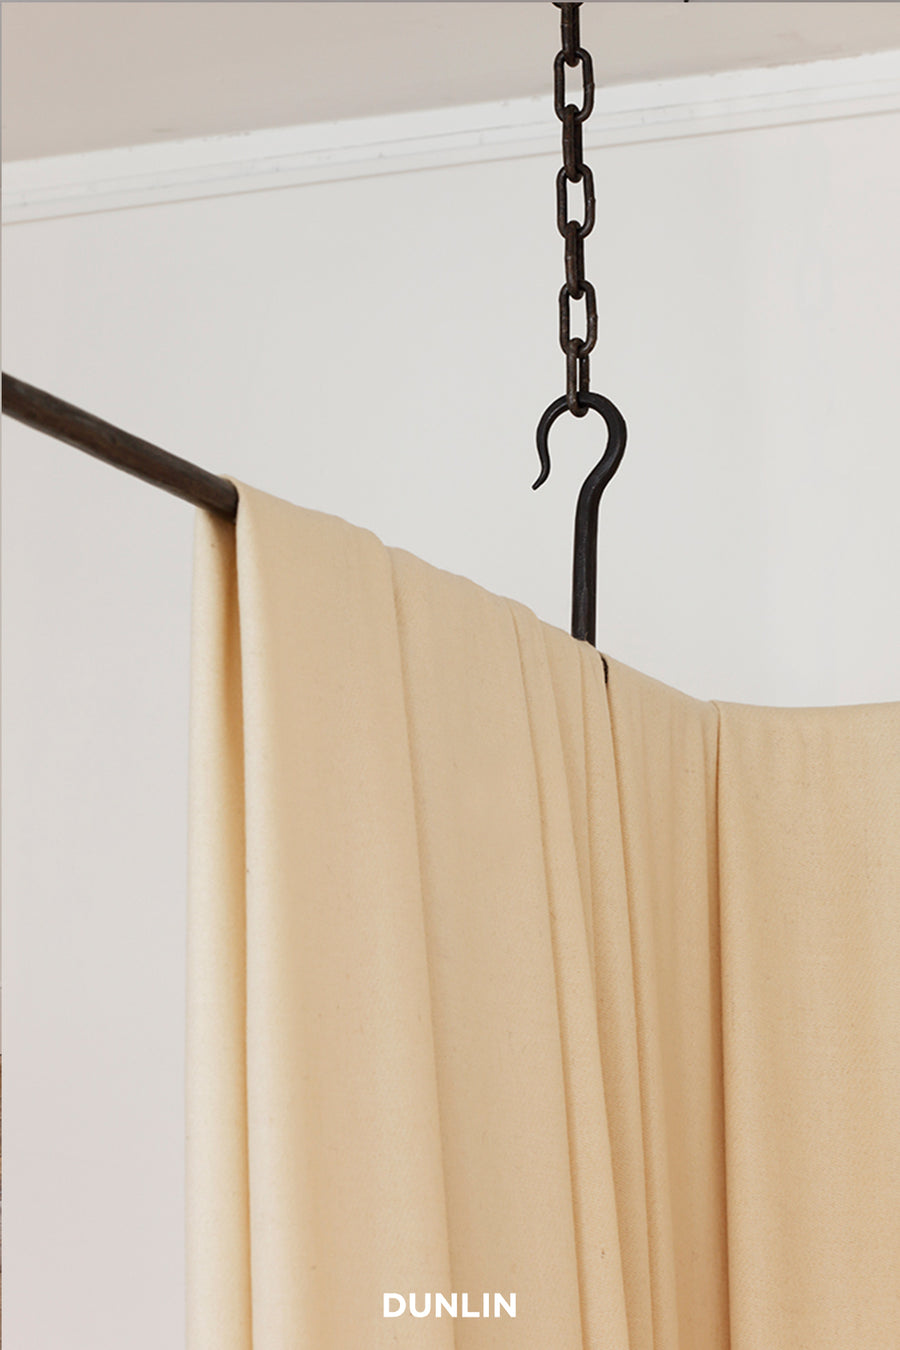 Rose Uniacke Suspension Bed Canopy